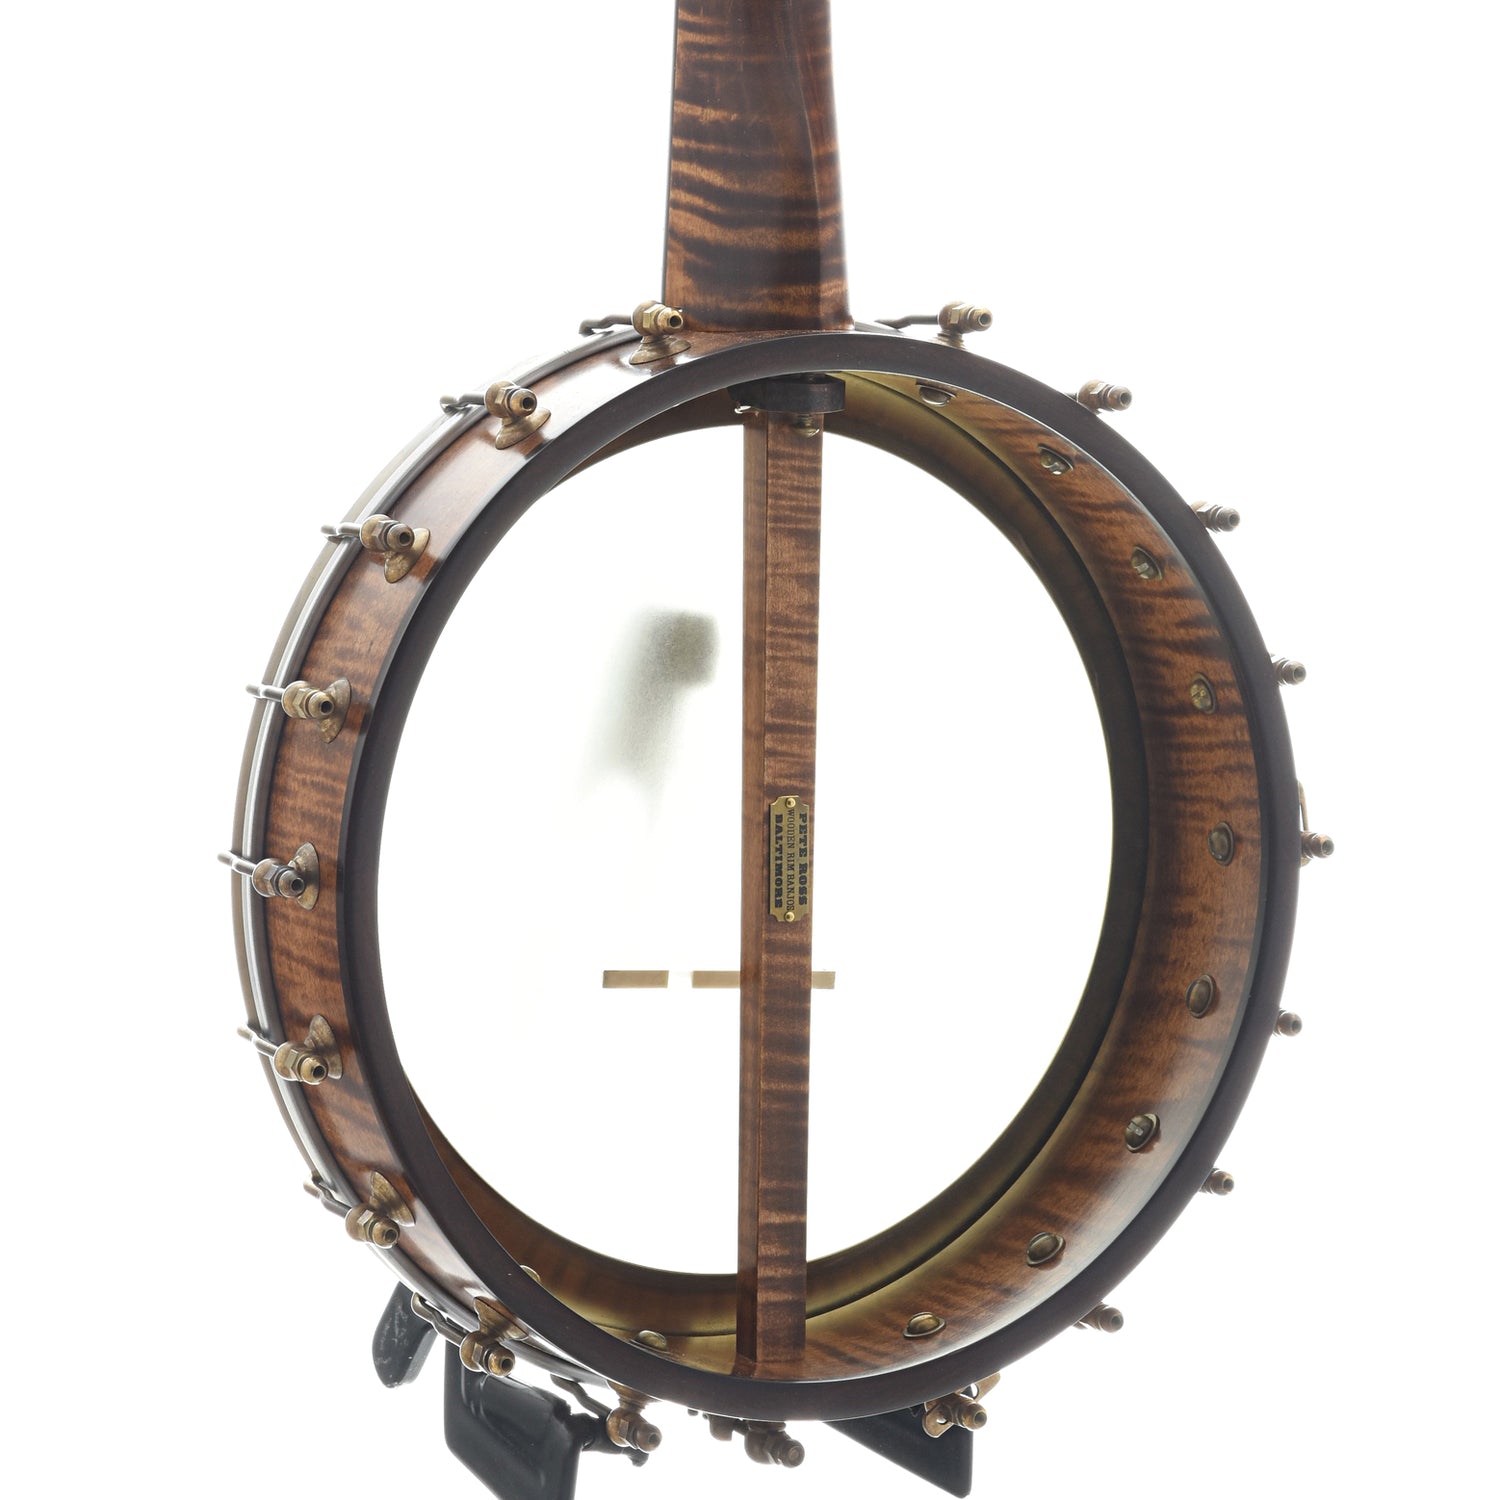 Back and Side of Pete Ross Dobson Banjo